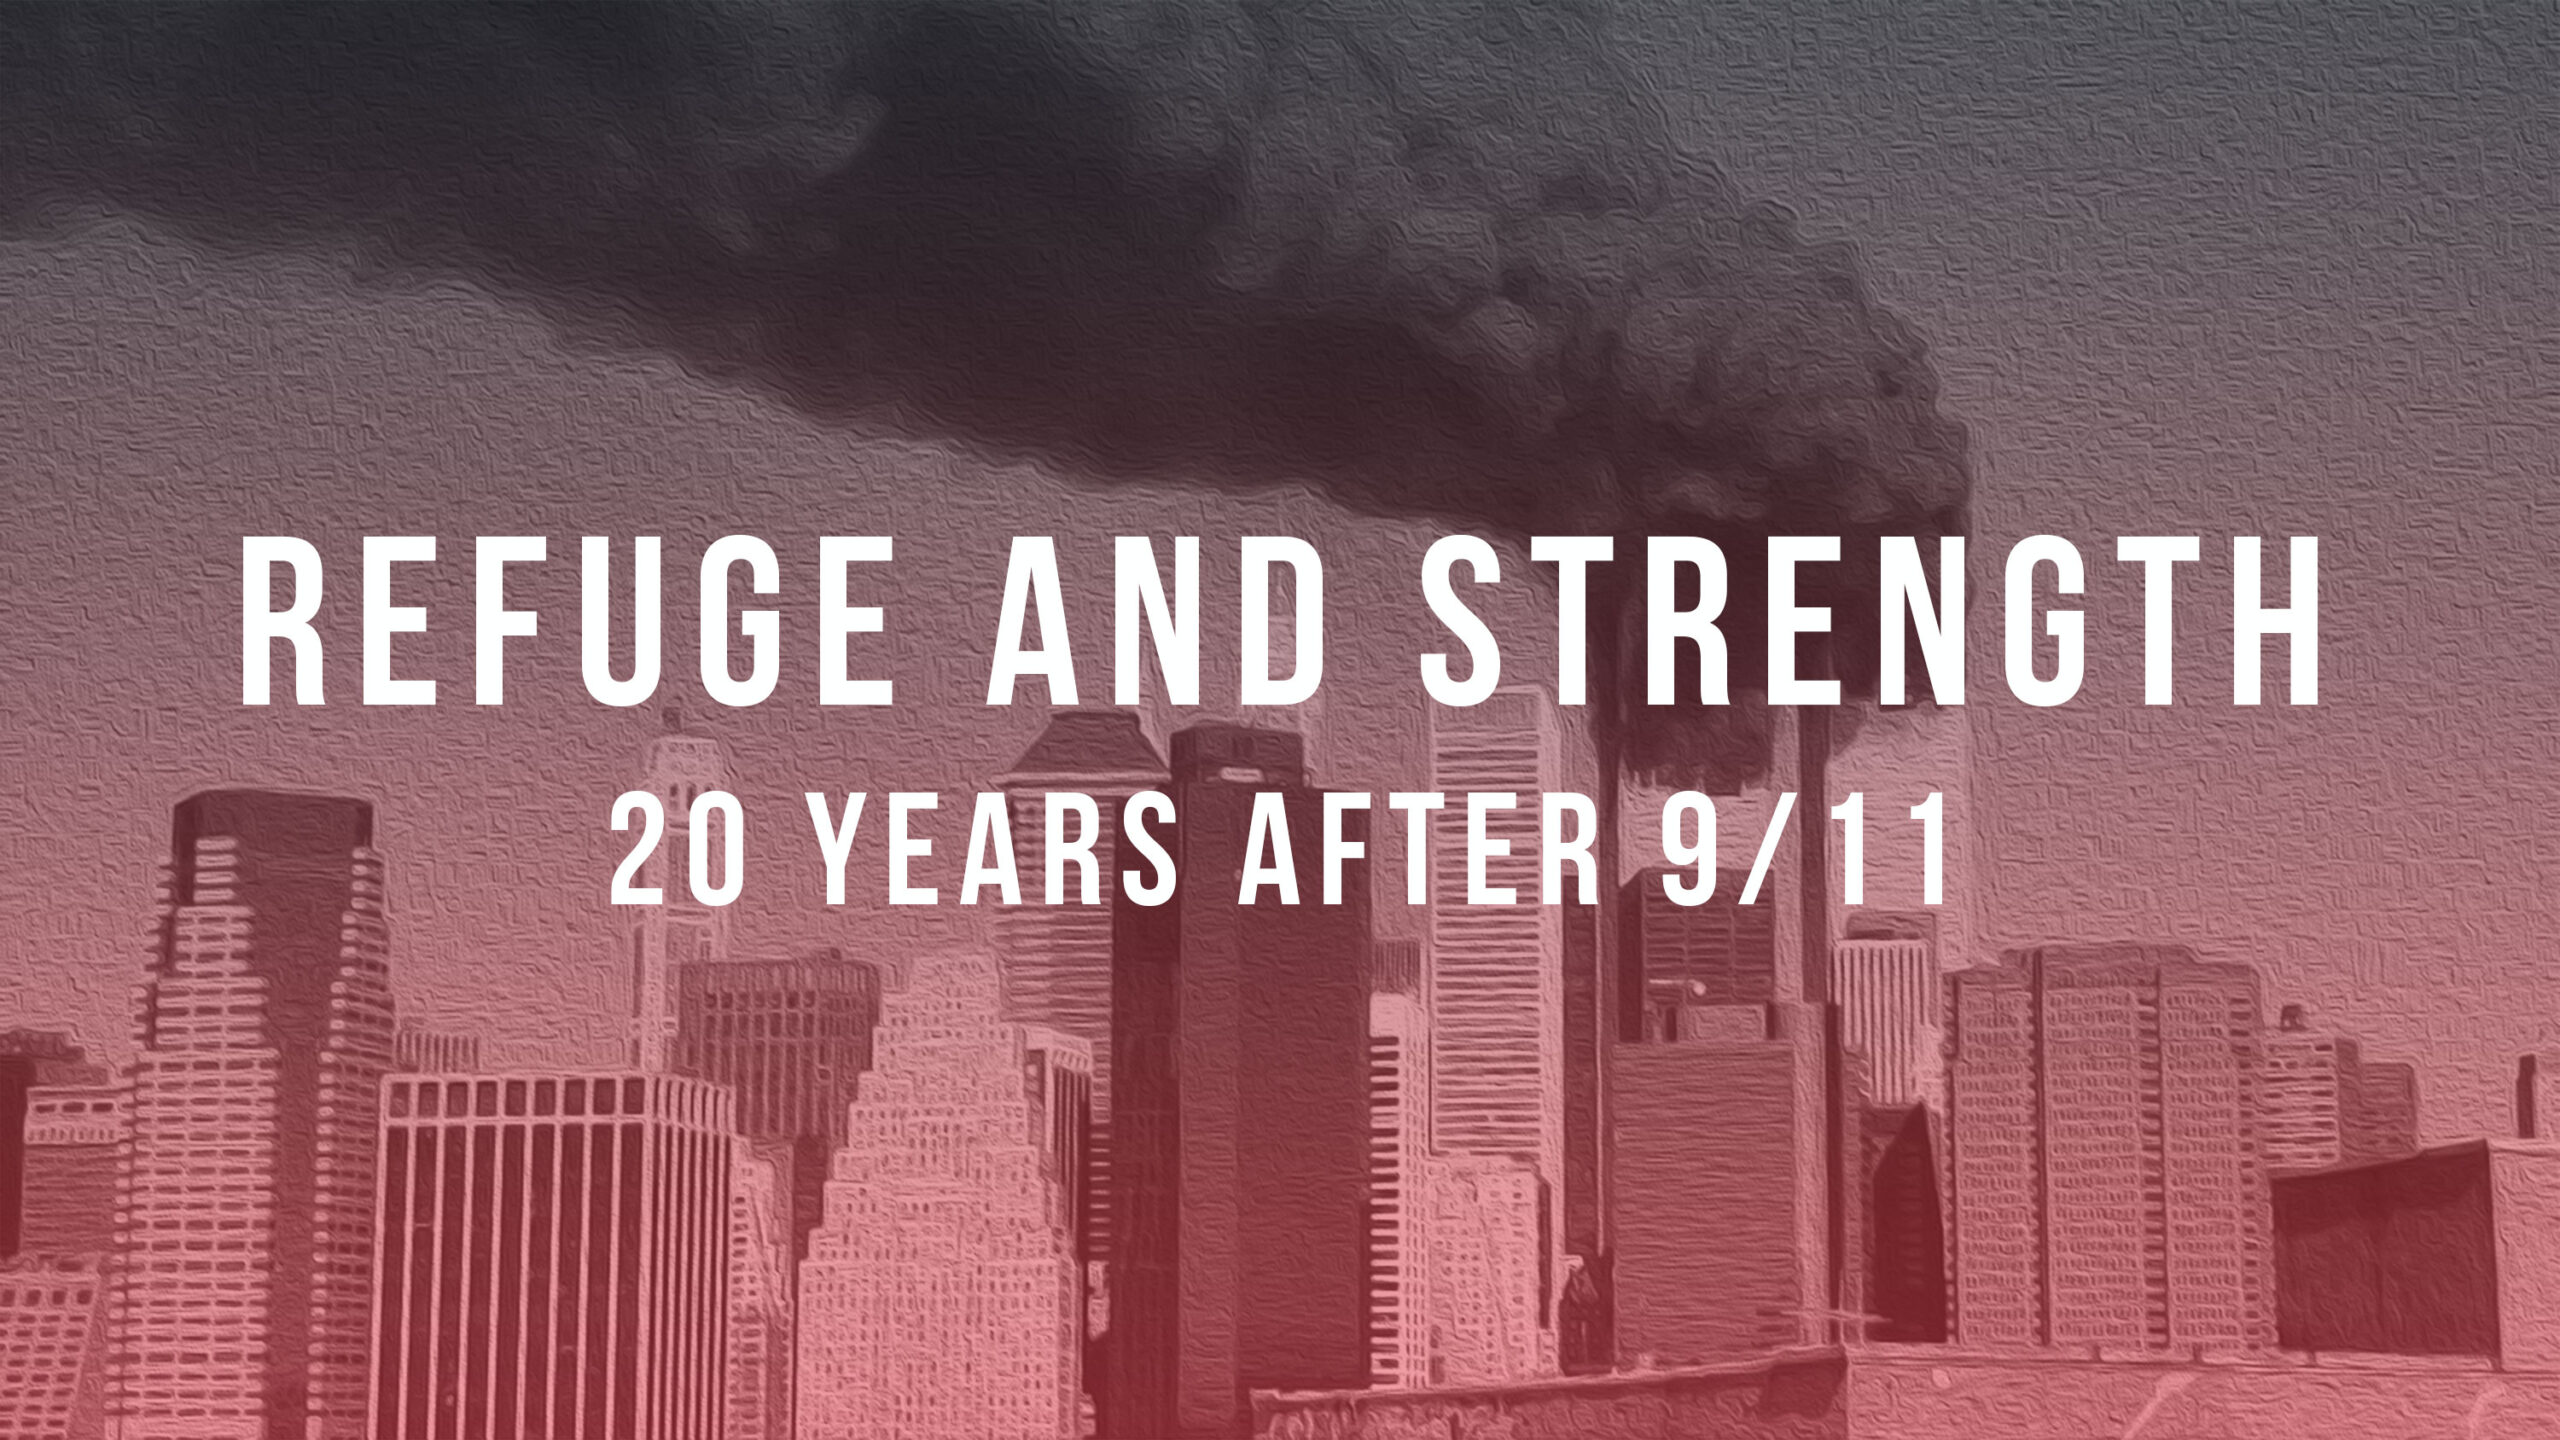 Refuge and Strength: 20 Years after 9/11